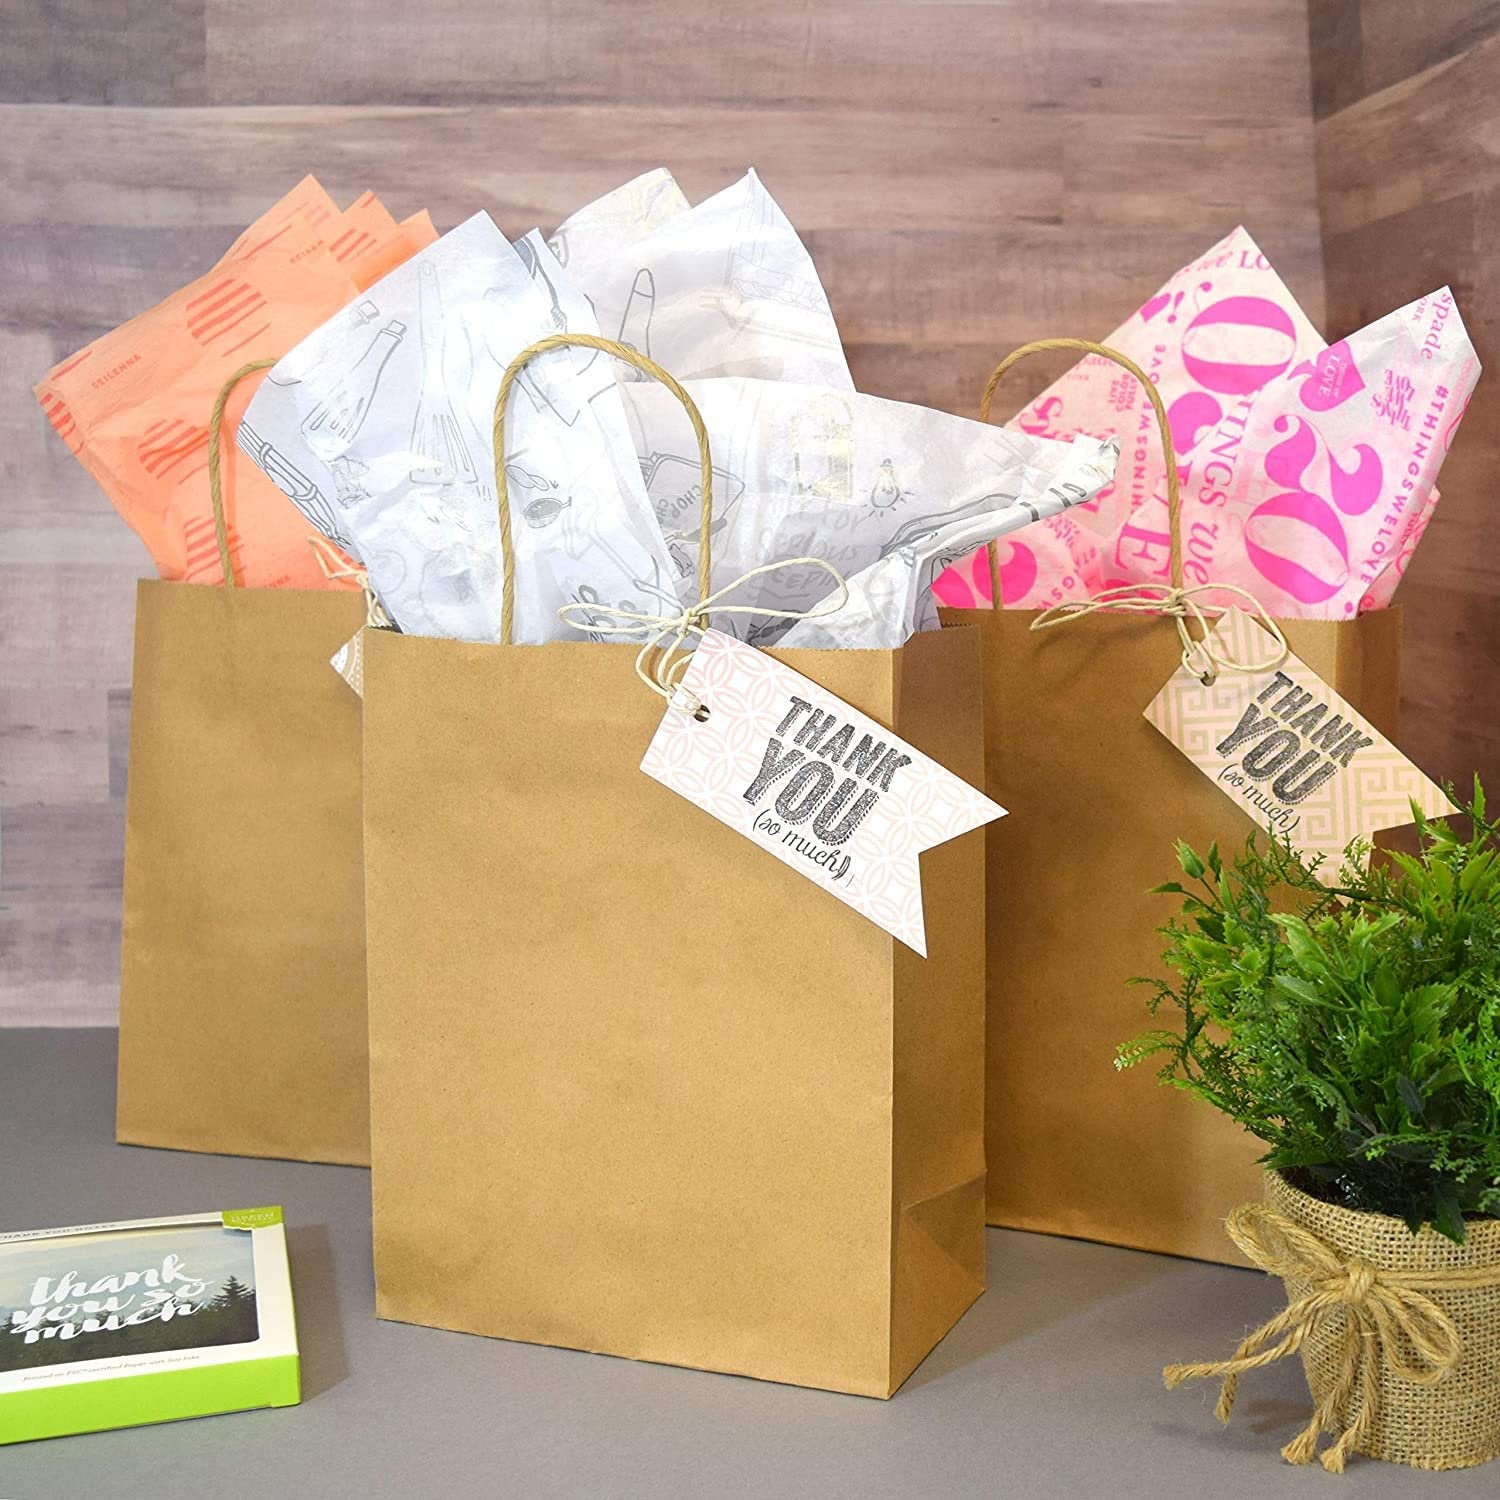 Prime Line Packaging Brown Kraft Paper Bags, 100 Count 8x4x10 Inch with Handles - Ideal for Small Business, Retail Stores, Gifts & Merchandise